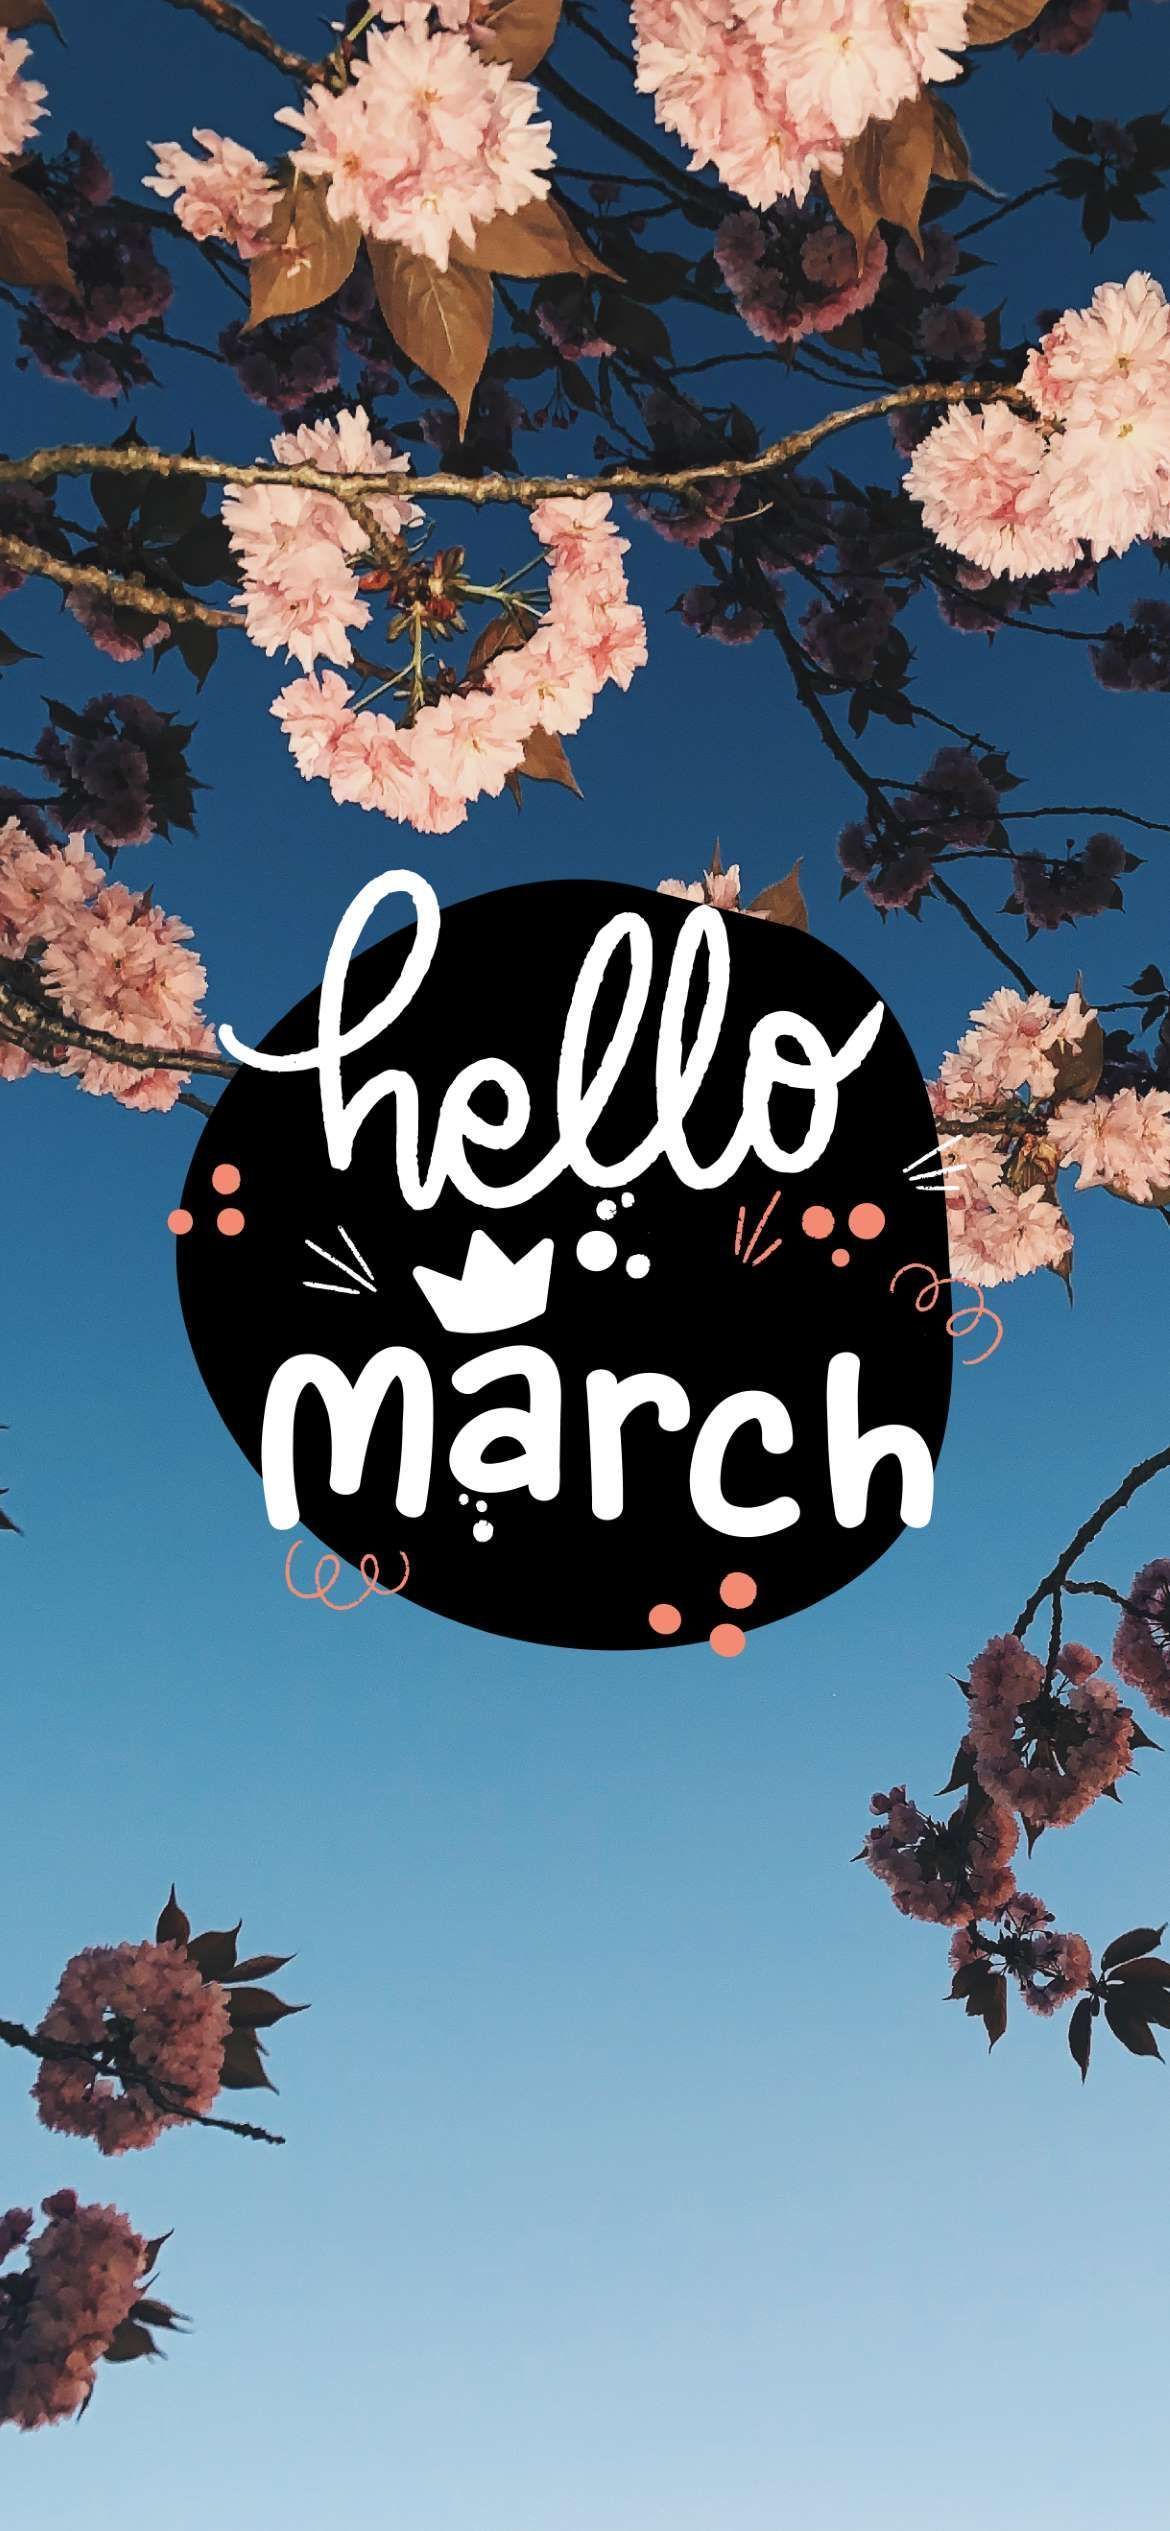 Hello March Floral Aesthetic Wallpaper. Hello march, March background, Aesthetic wallpaper